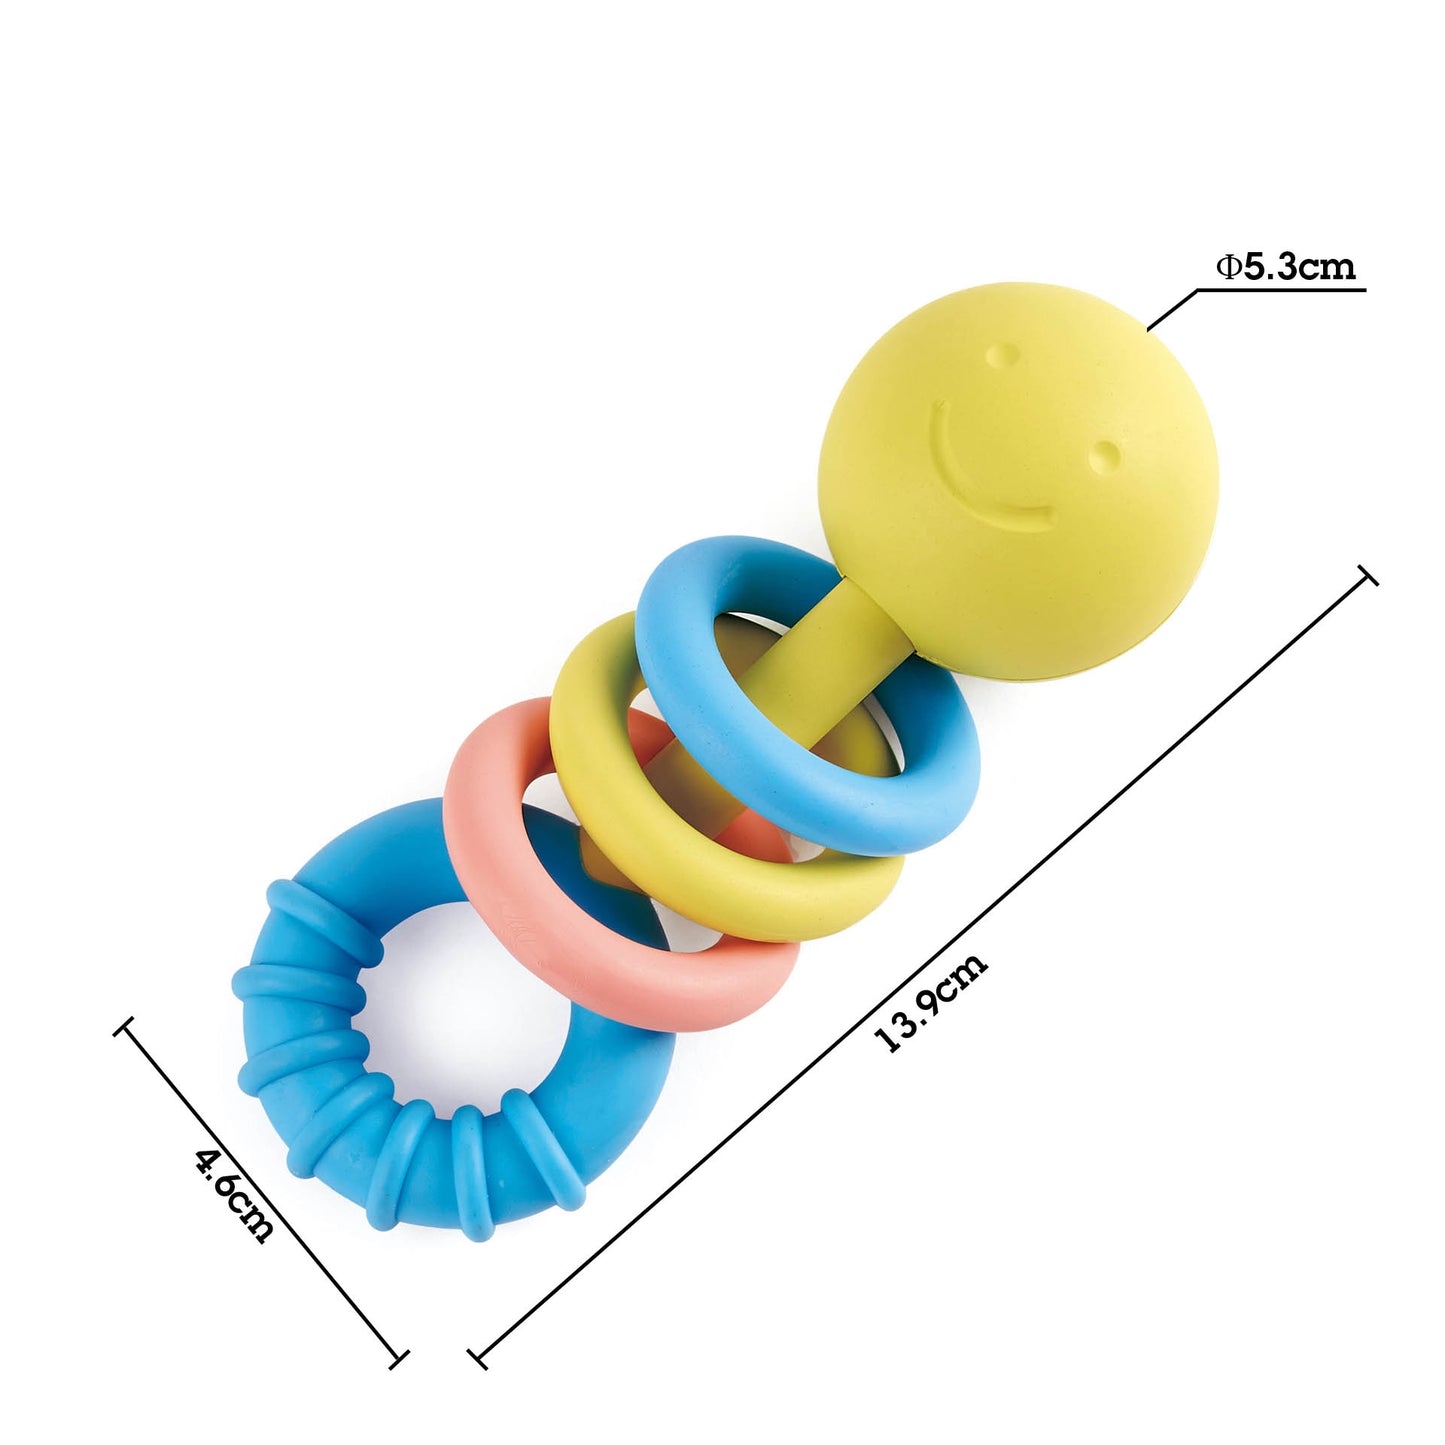 Hape Ratling Rings Teether Safe Rice-Based Infant Toy with Rattling Rings for Sensory Stimulation and Teething Relief